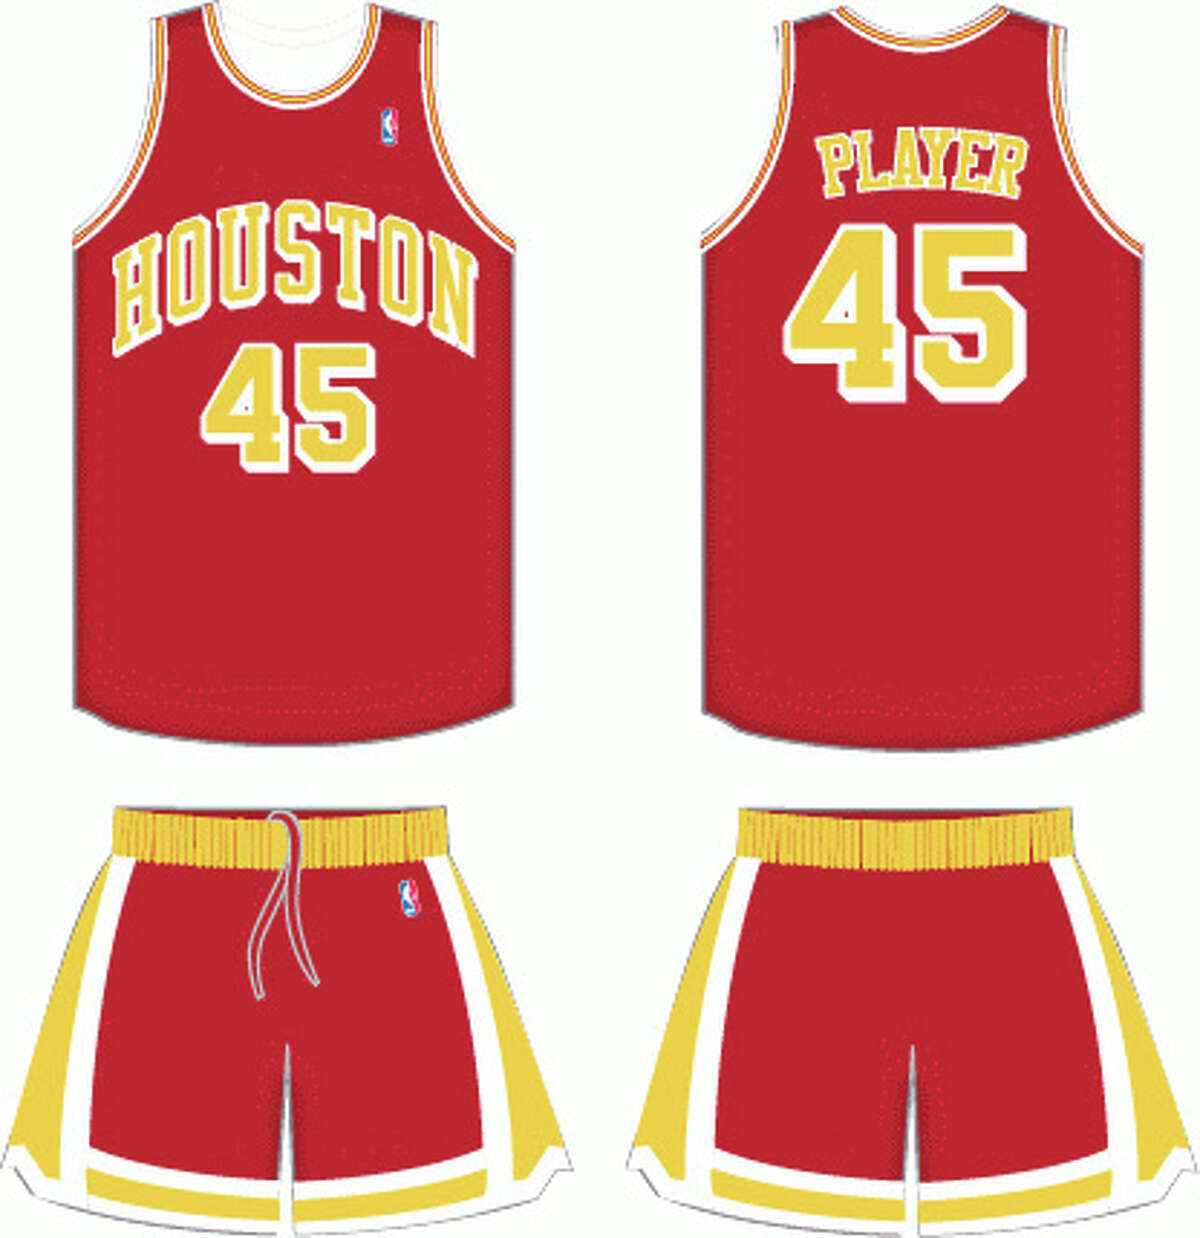 Houston Rockets' 1960s-influenced throwback uniforms for 2022-23! 🔥 or 🗑?